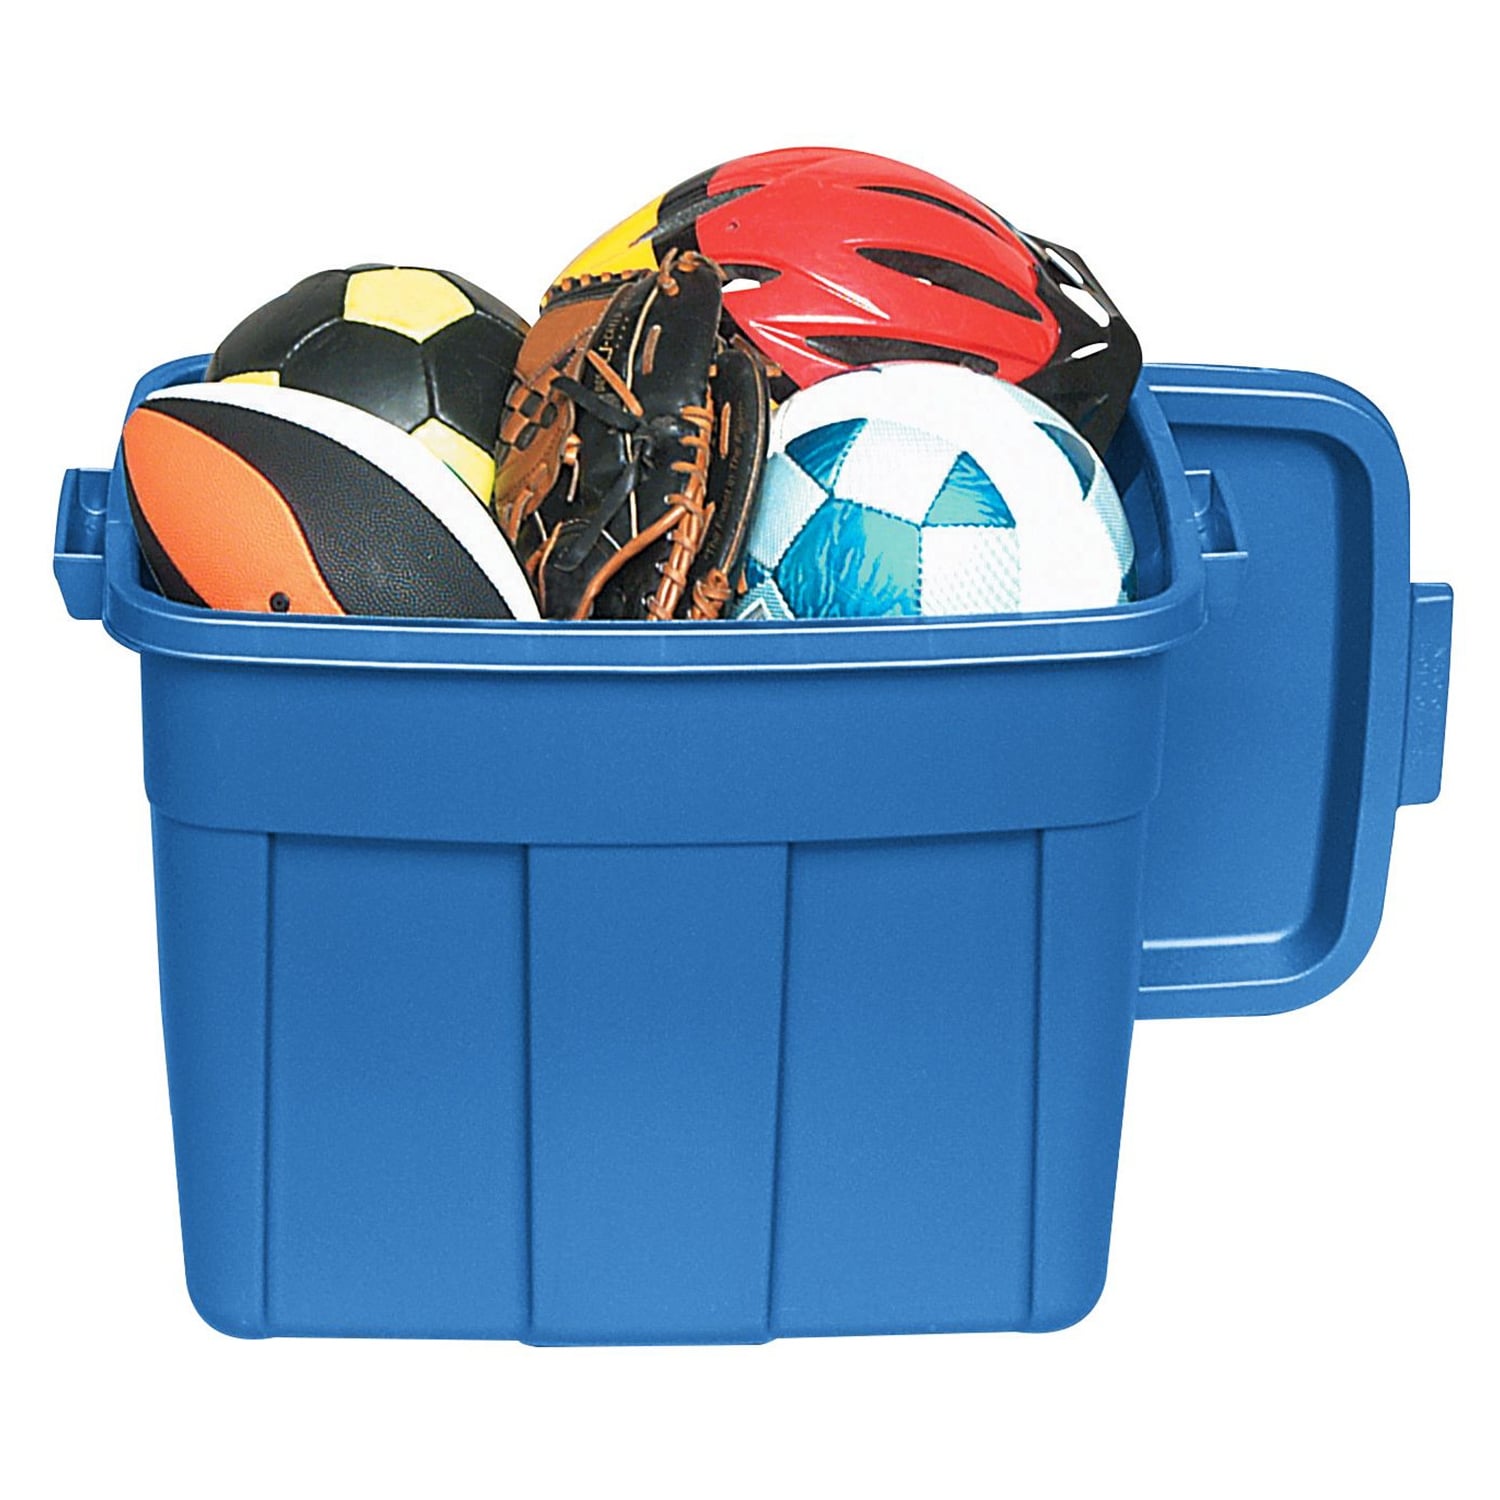 https://ak1.ostkcdn.com/images/products/is/images/direct/83a52d34b12d4339c99198861e5a415358d1cdf9/Rubbermaid-18-Gallon-Stackable-Storage-Container%2C-Dark-Indigo-Metallic-%286-Pack%29.jpg